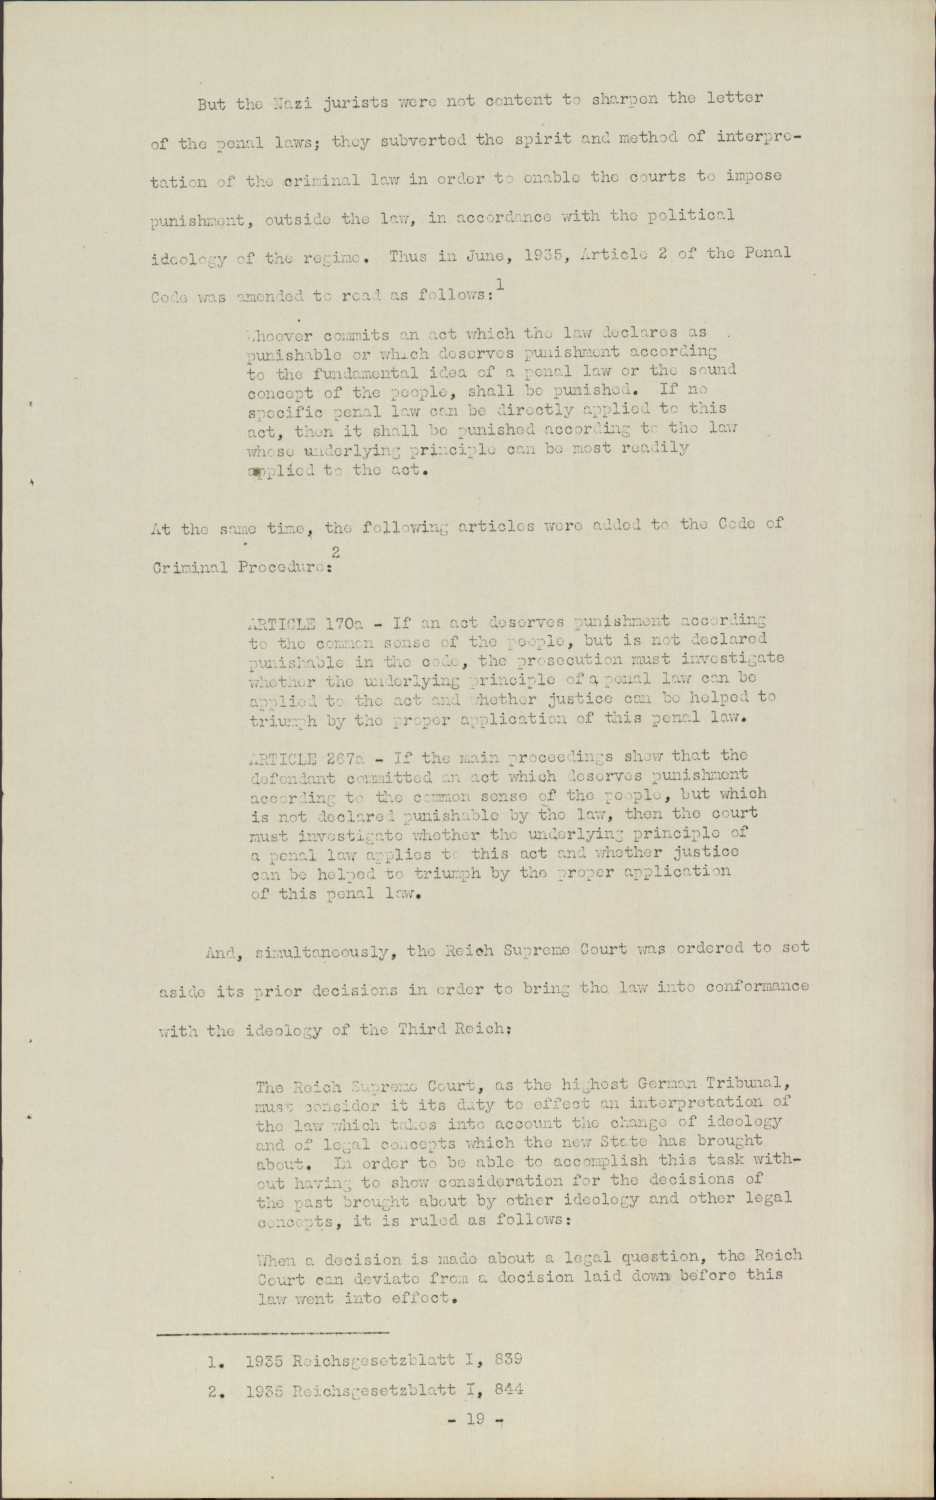 Scanned document page 20